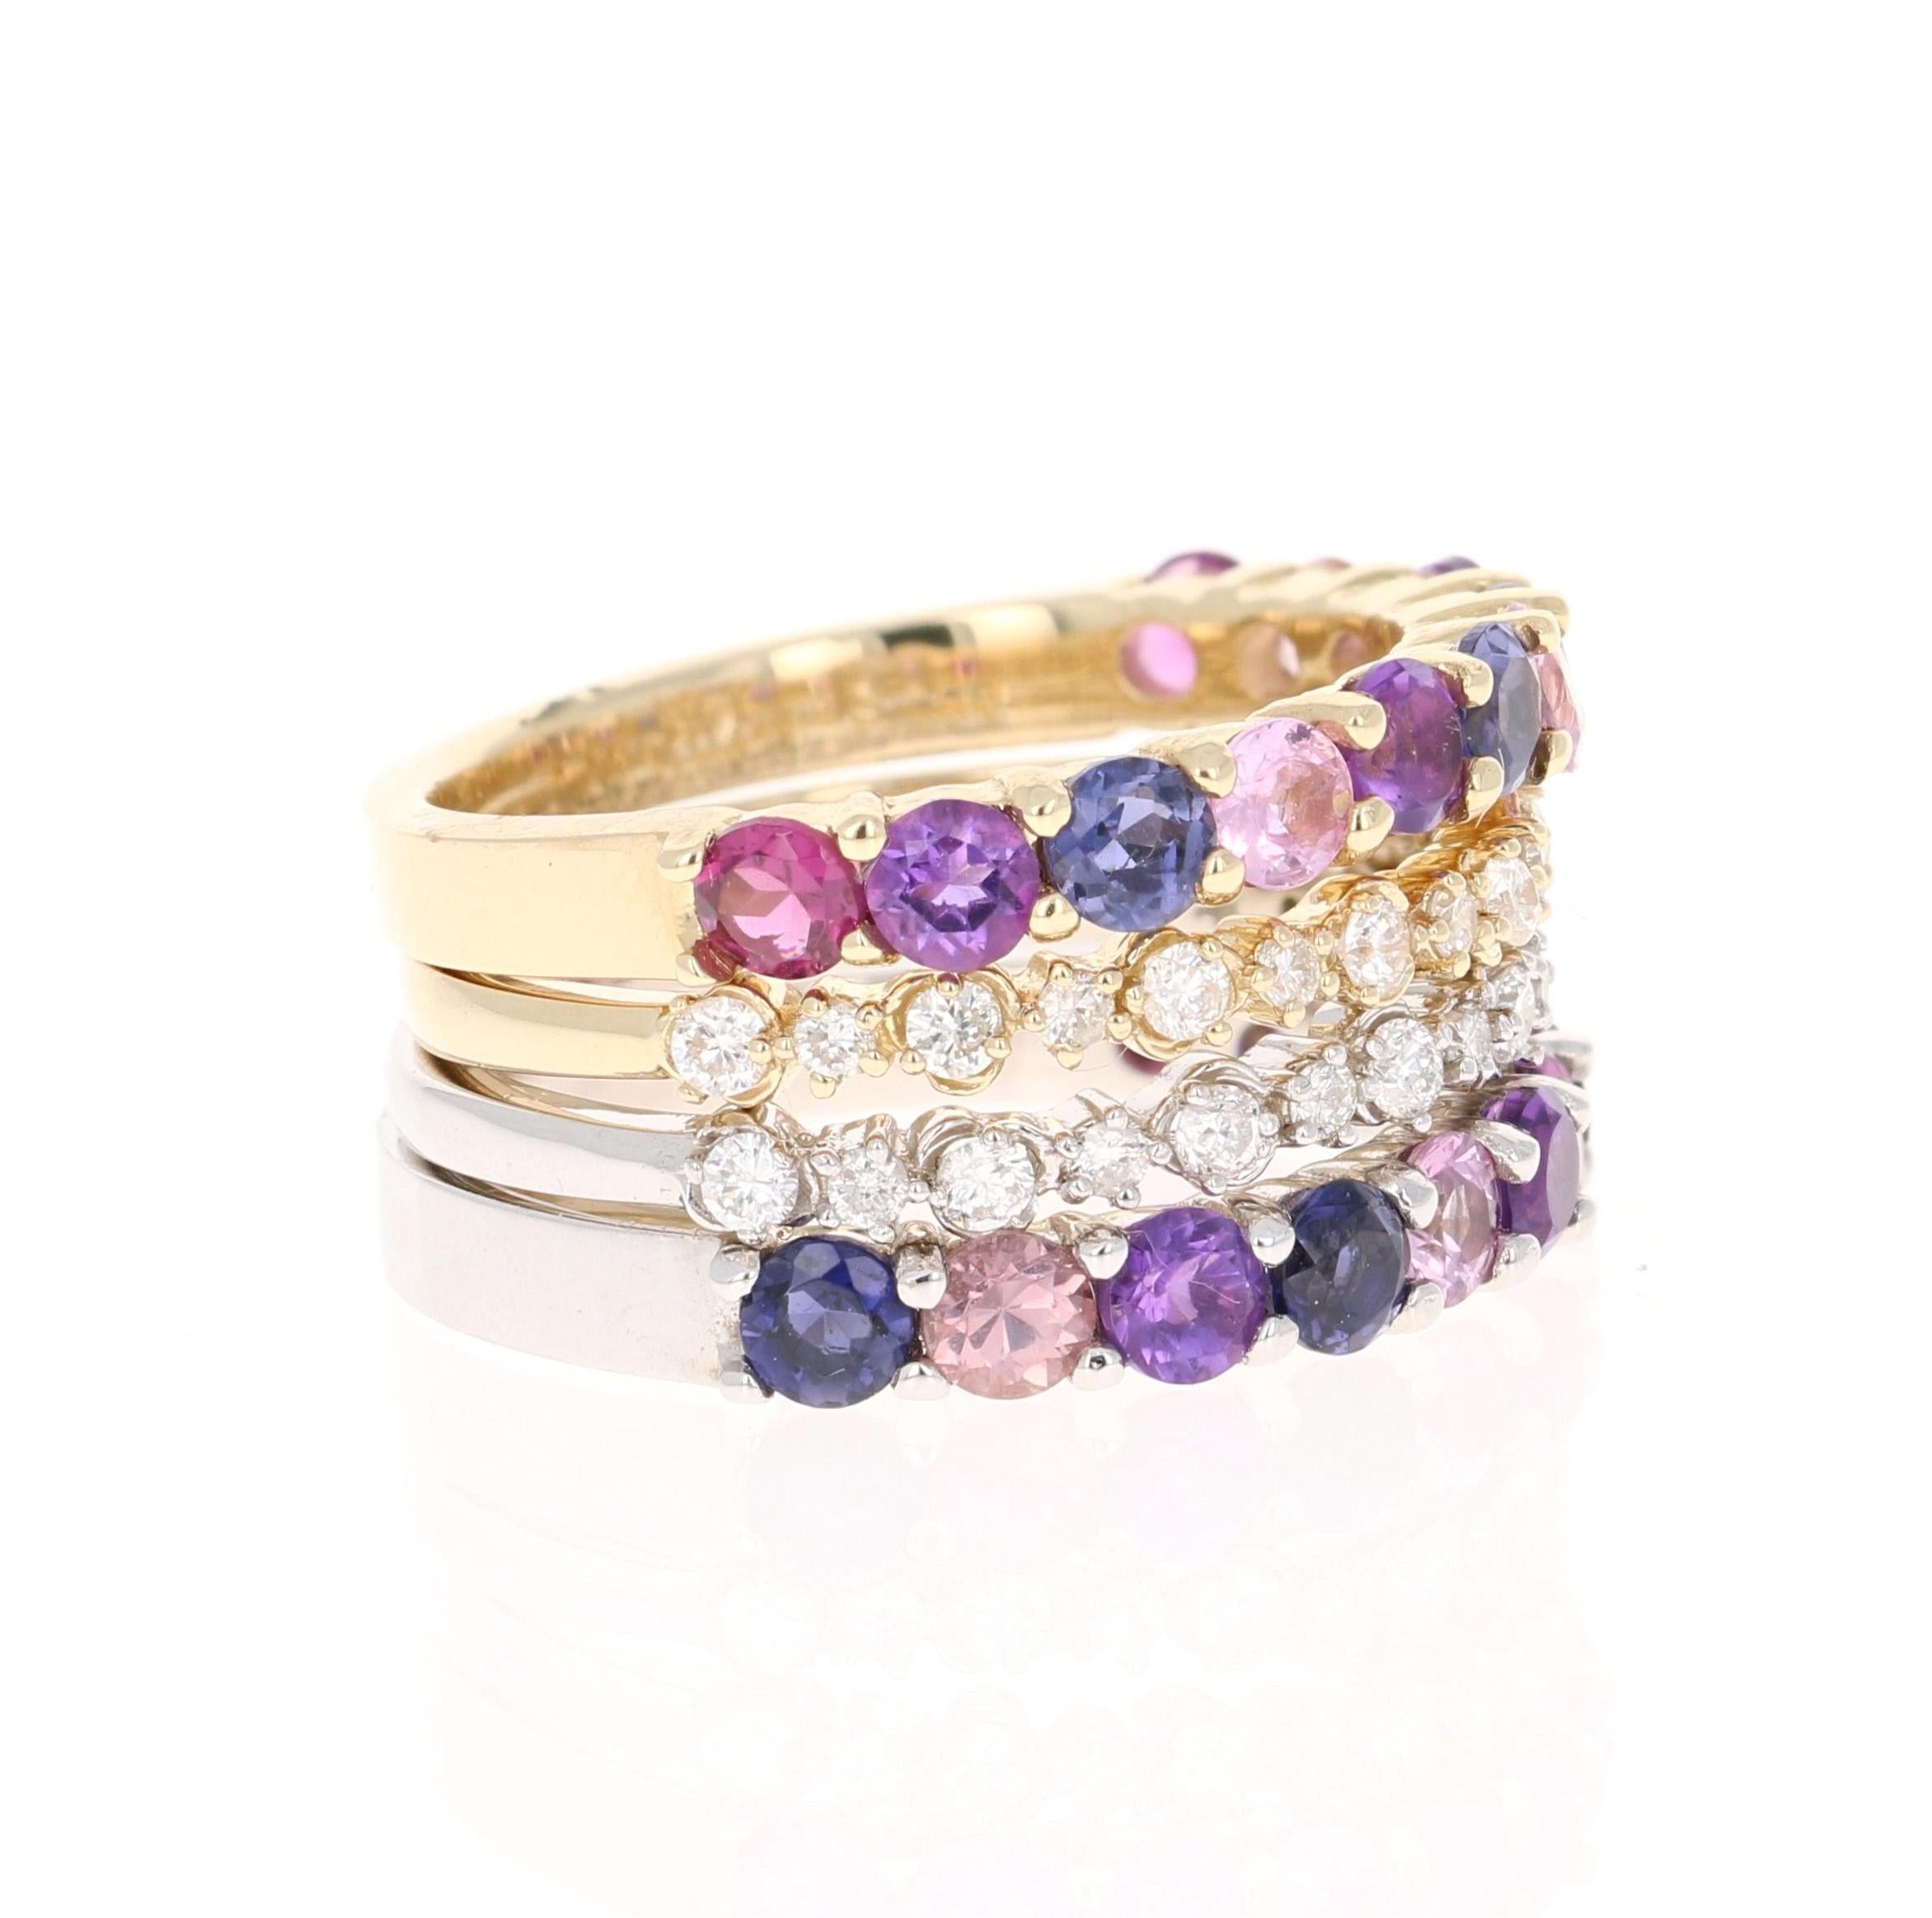 These versatile stackable bands can be worn in multiple ways and can even be used with other jewelry. 

There are 22 colored stones consisting of Purple Garnets, Pink Sapphires, and Amethysts weighing 2.90 carats. For the diamond bands there are 30